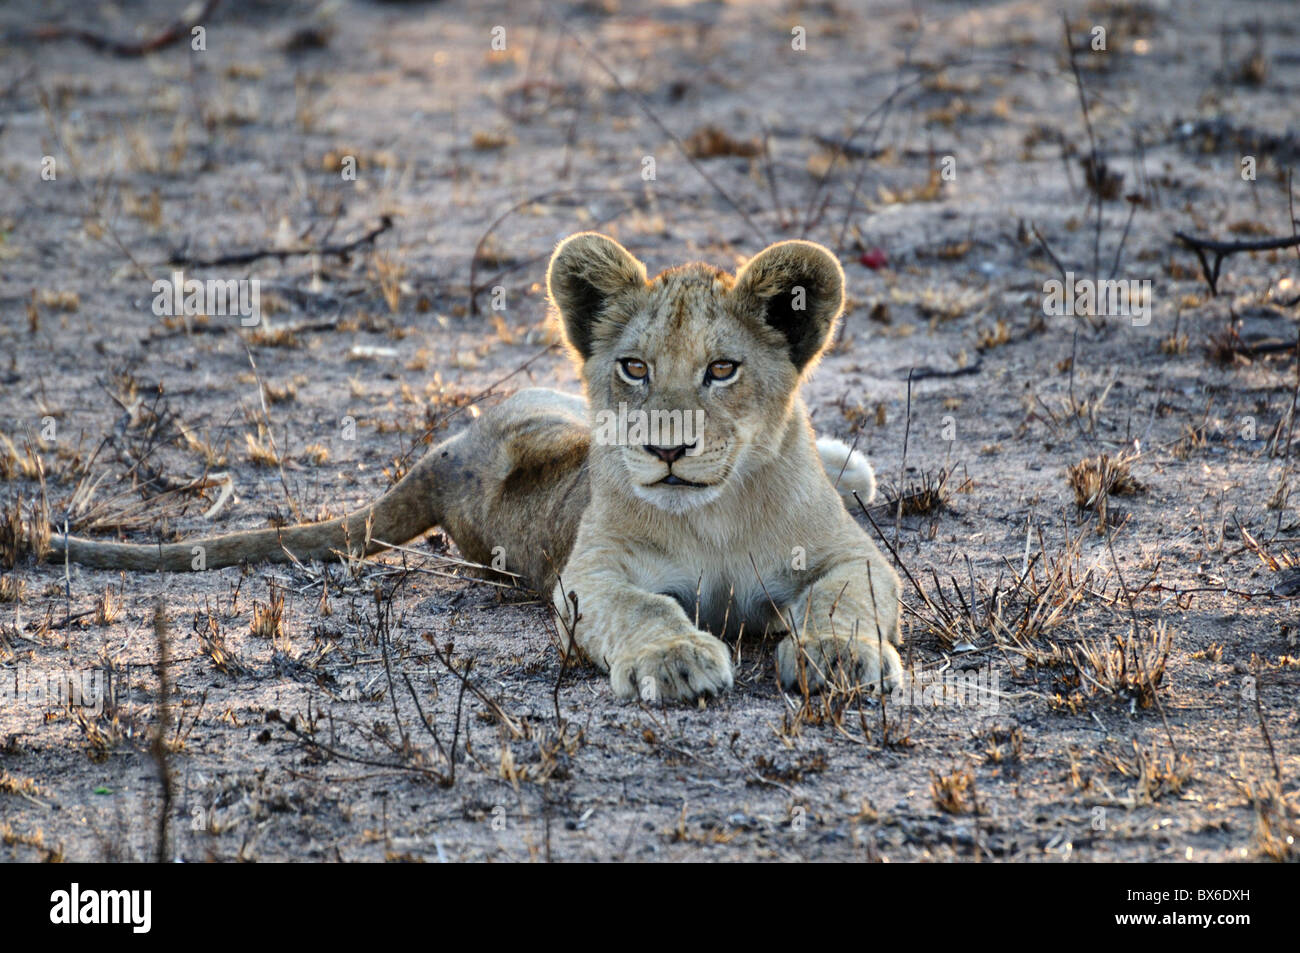 A young lion cub. Kruger National Park, South Africa. Stock Photo